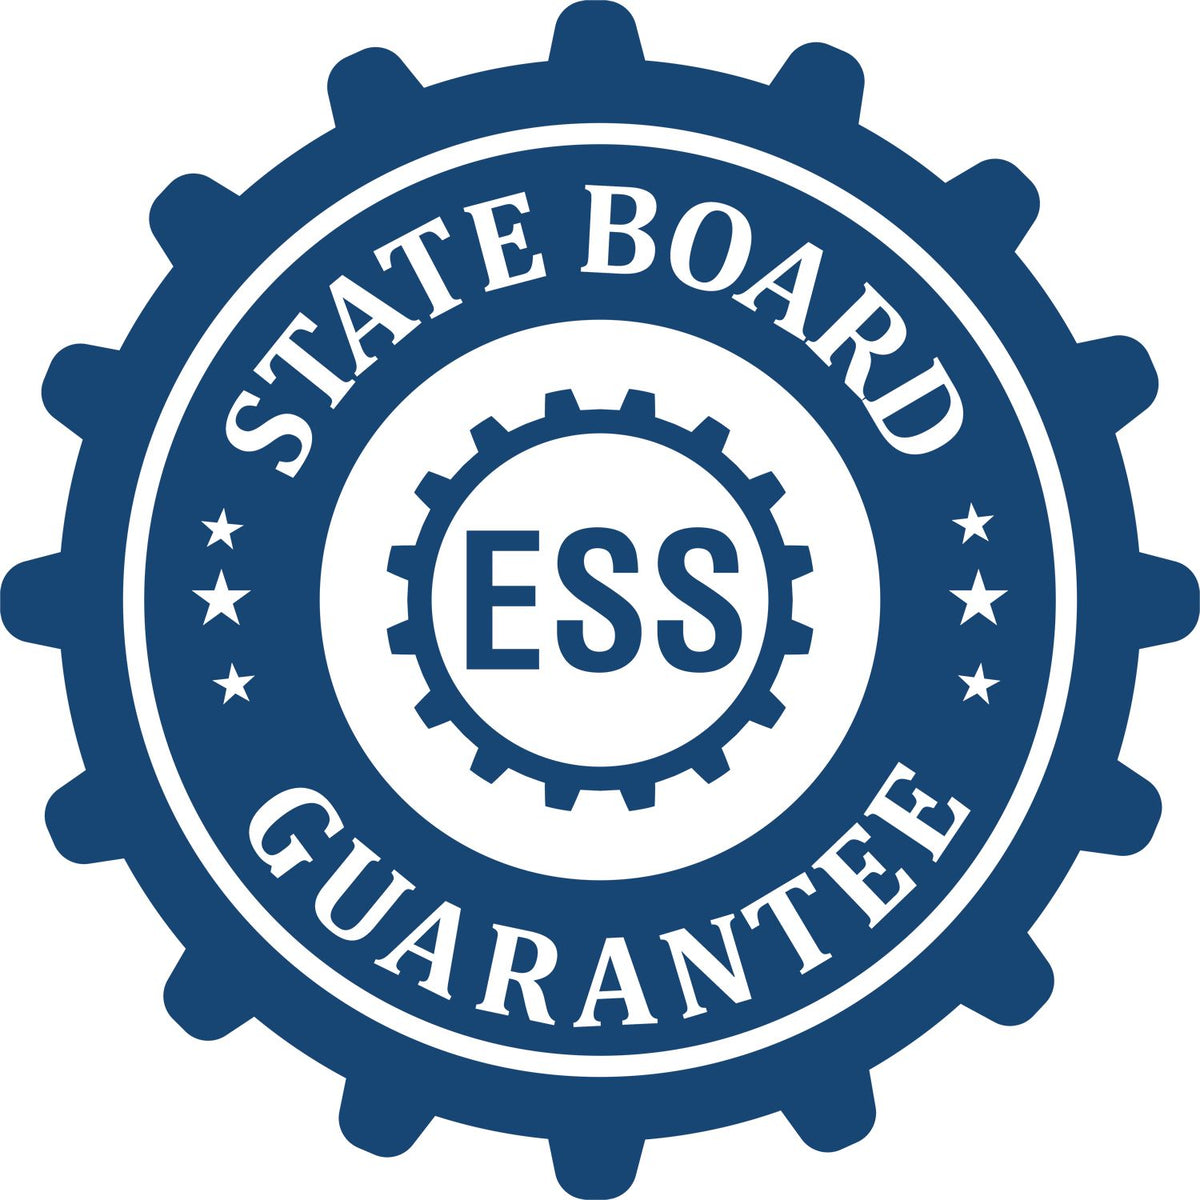 An emblem in a gear shape illustrating a state board guarantee for the Iowa Geologist Desk Seal